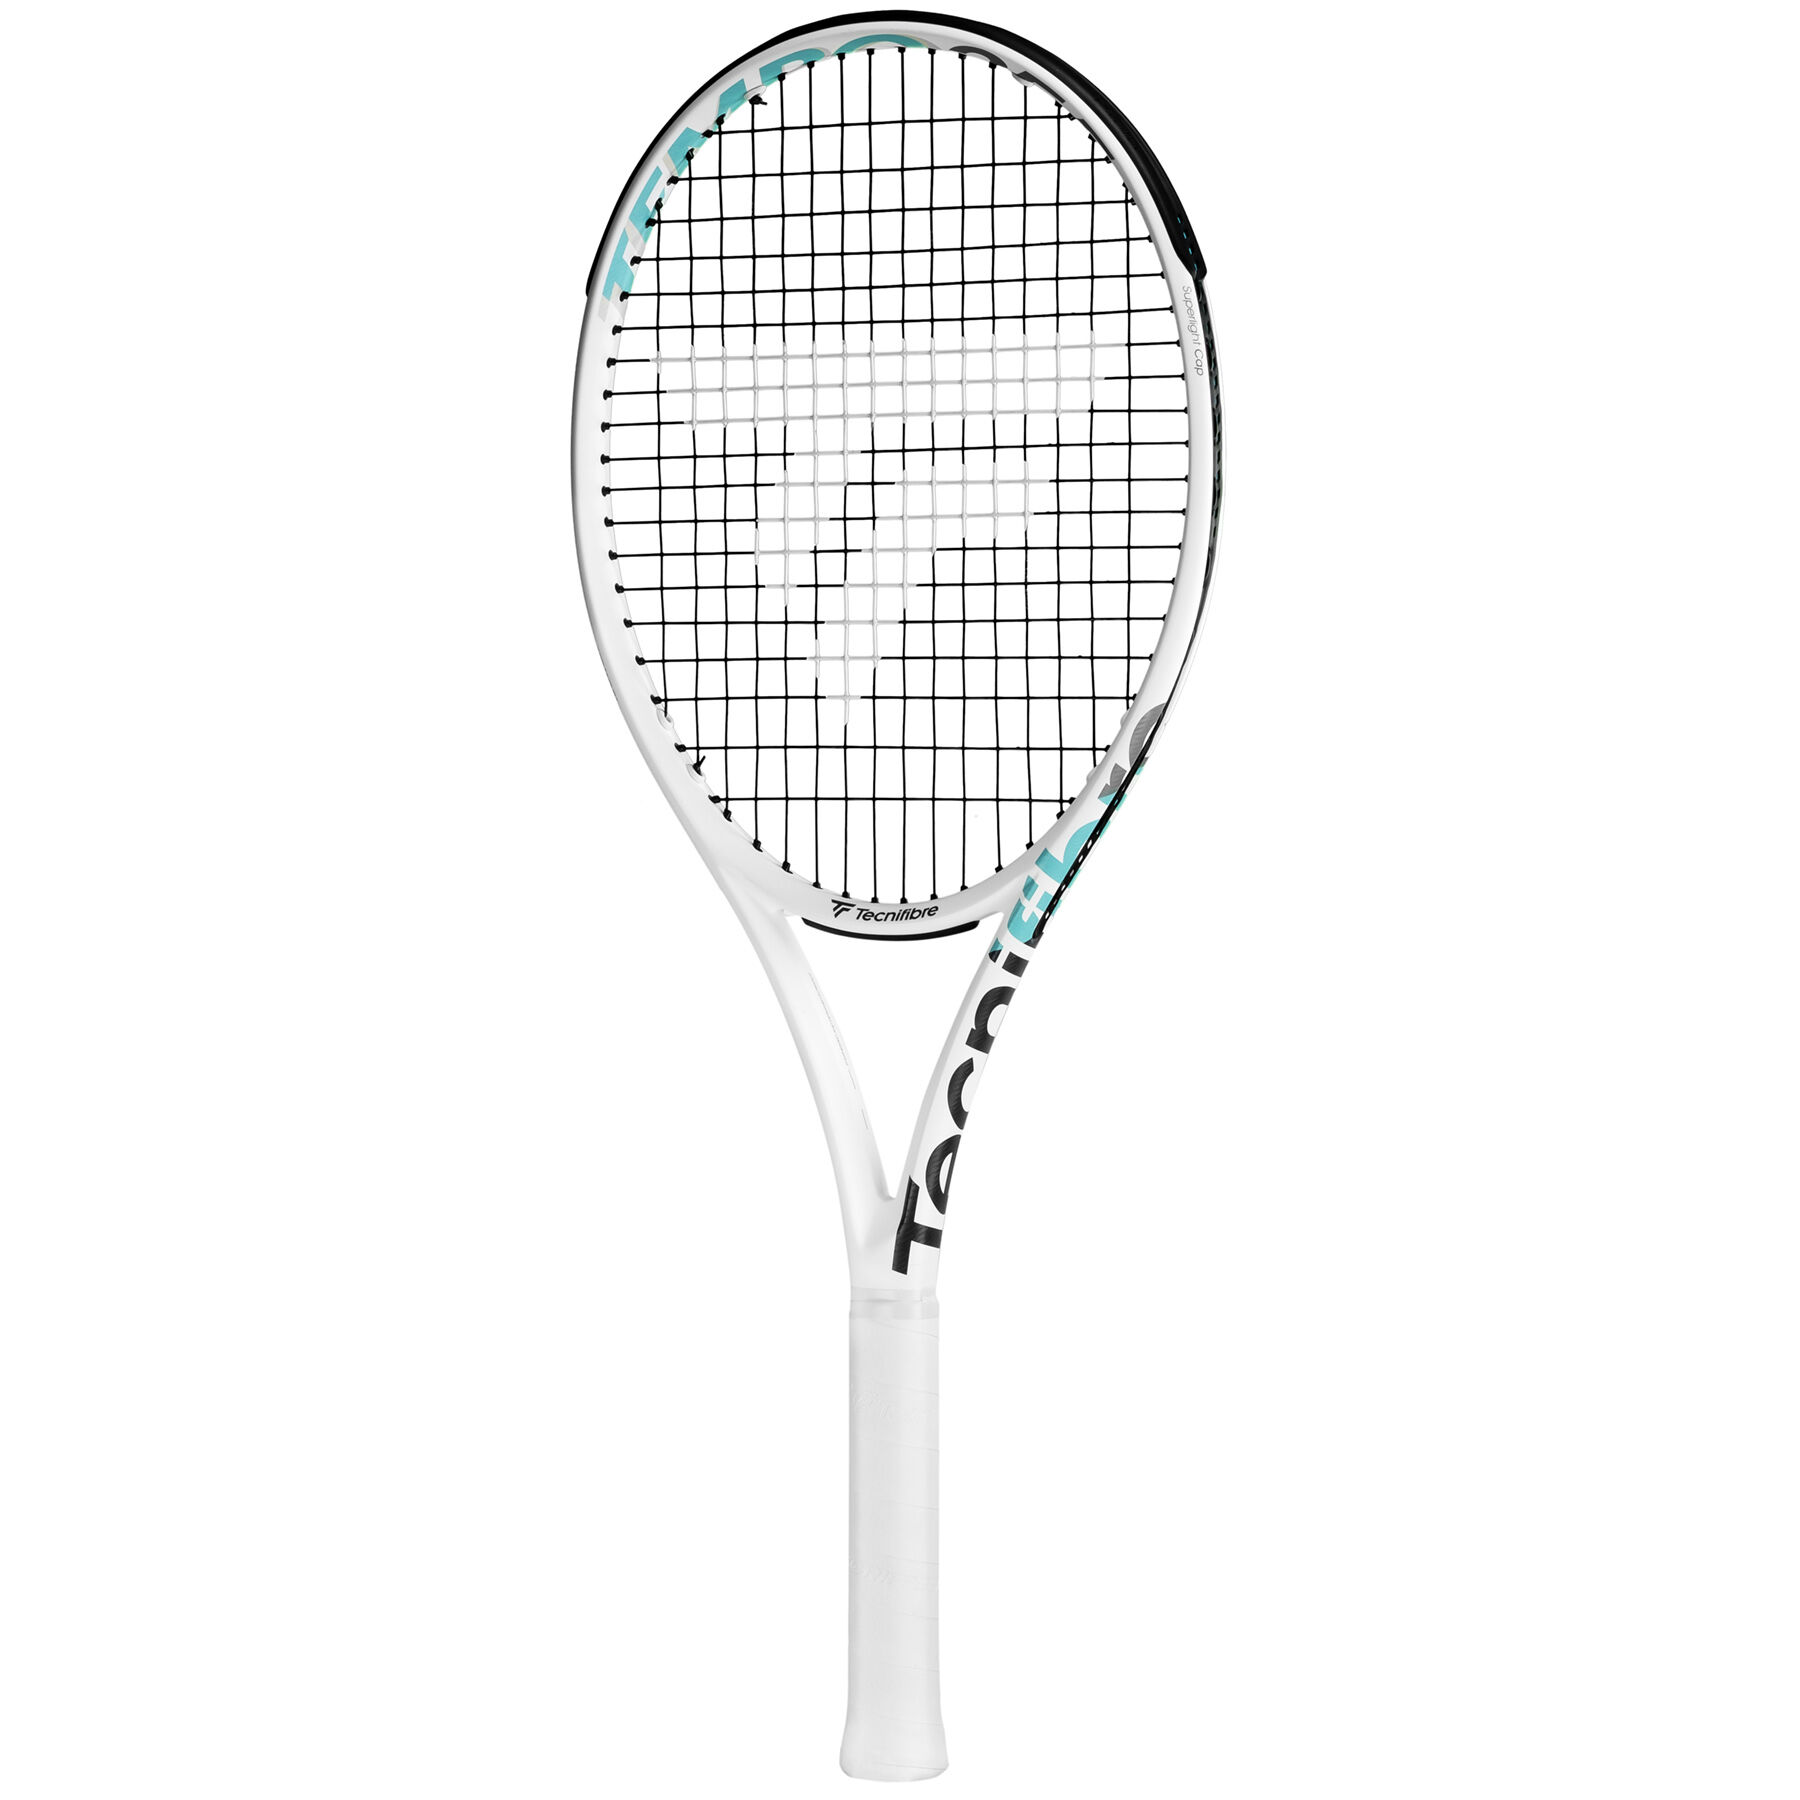 Discover the Tempo range of tennis rackets